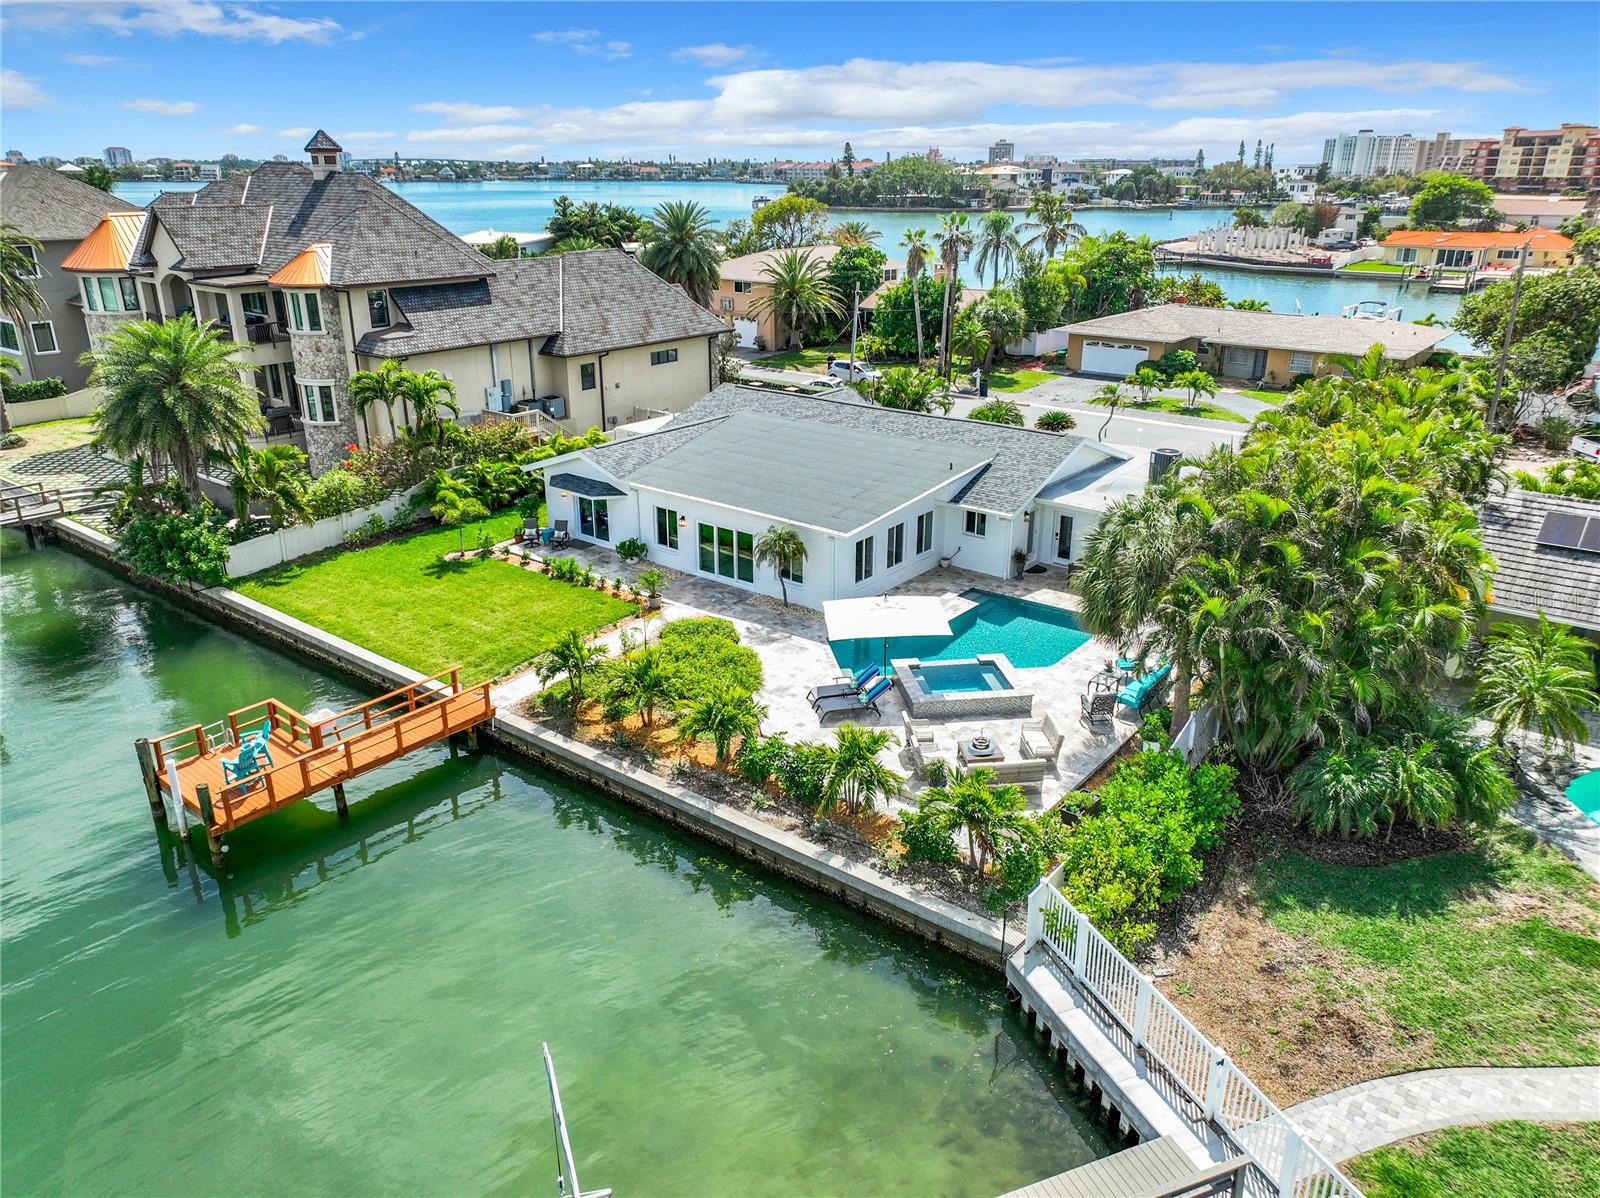 Aerial view of the stunning home and yard on the intracoastal